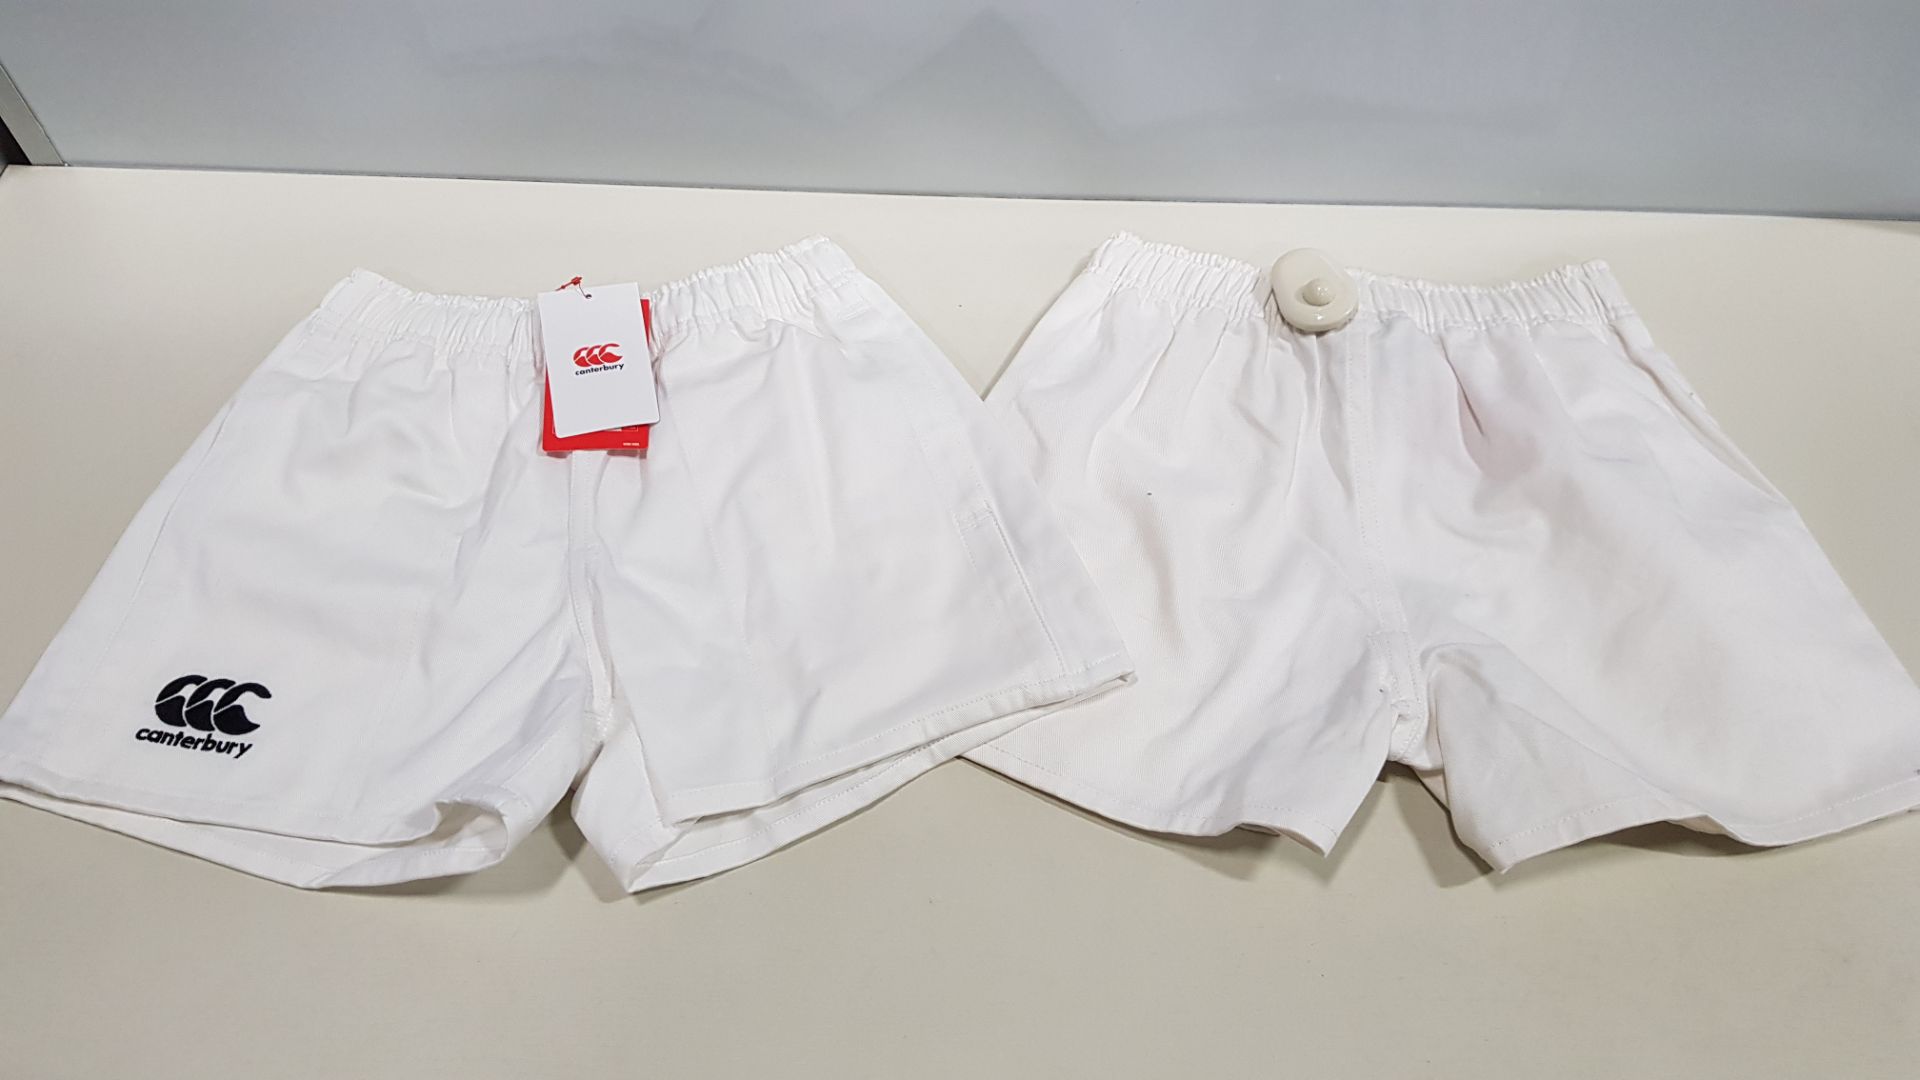 15 X BRAND NEW CANTERBURY SHORTS IN WHITE SIZE 9-10 YEARS (PICK LOOSE) - NOTE SOME SECURITY TAGGED